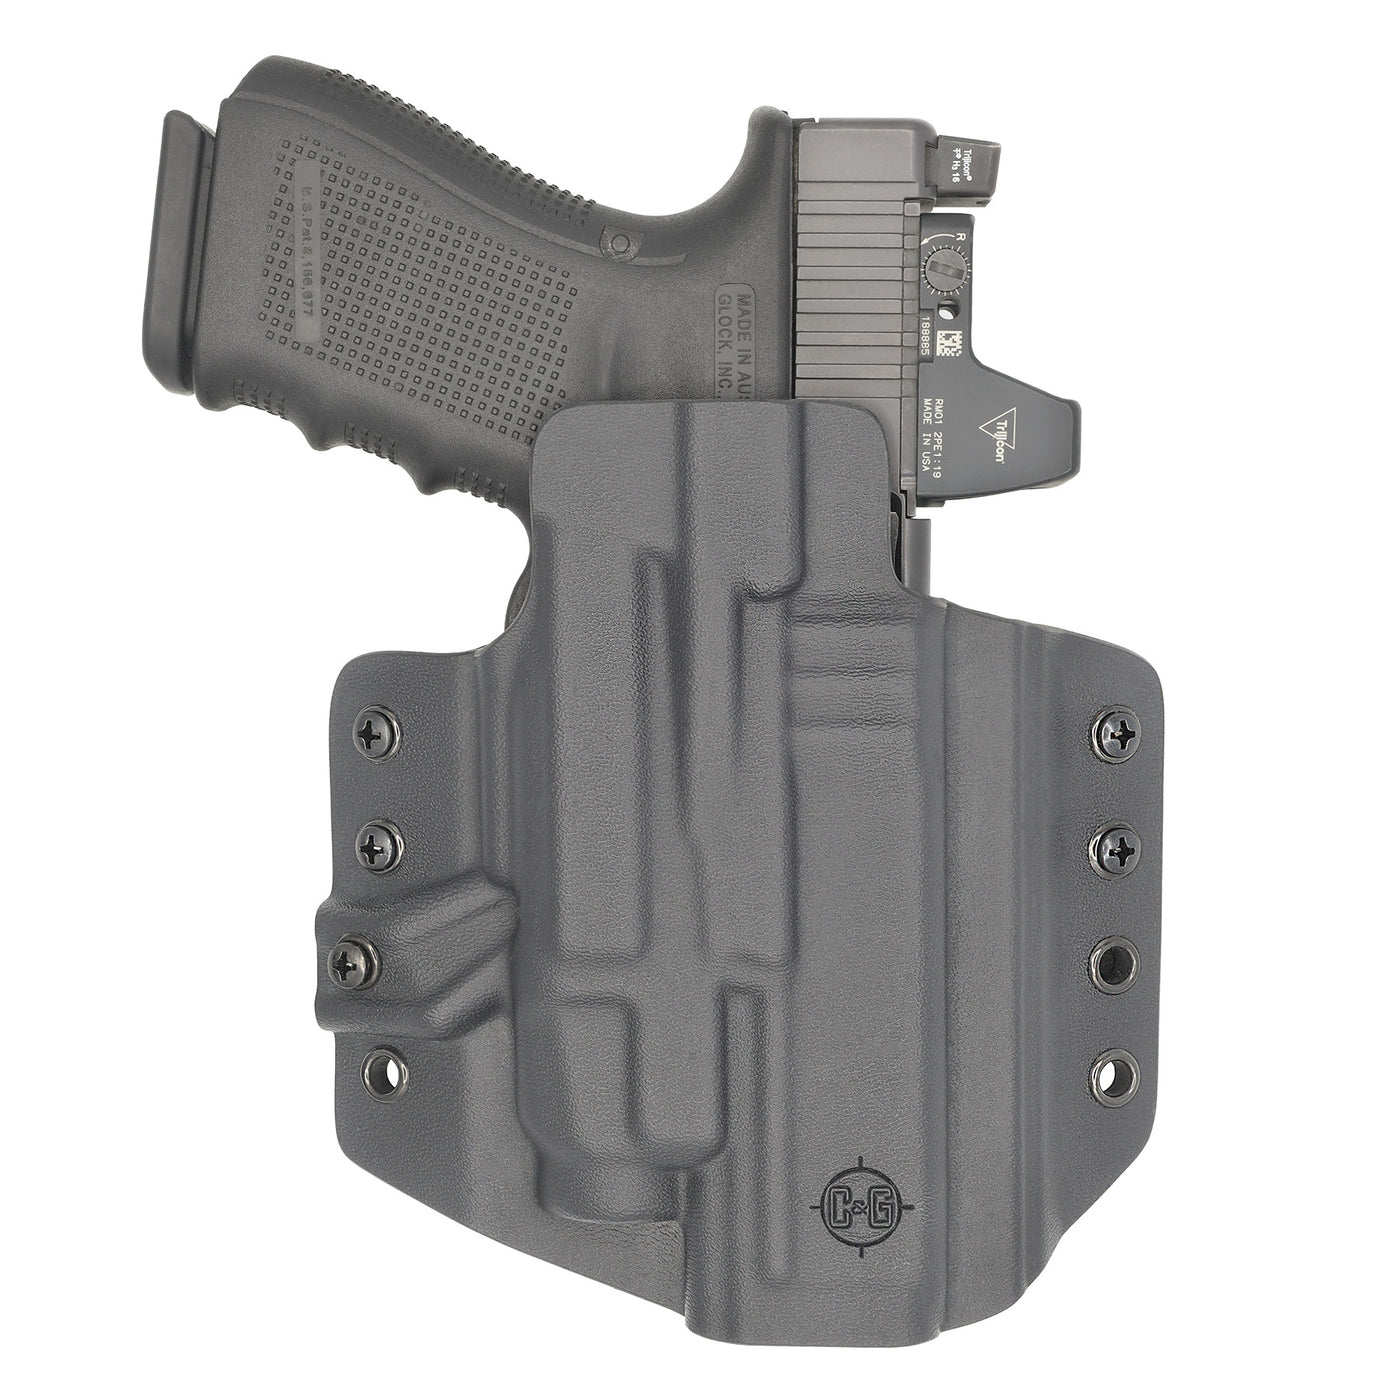 C&G Holsters custom OWB Tactical OZ9/c streamlight TLR7/a in holstered position